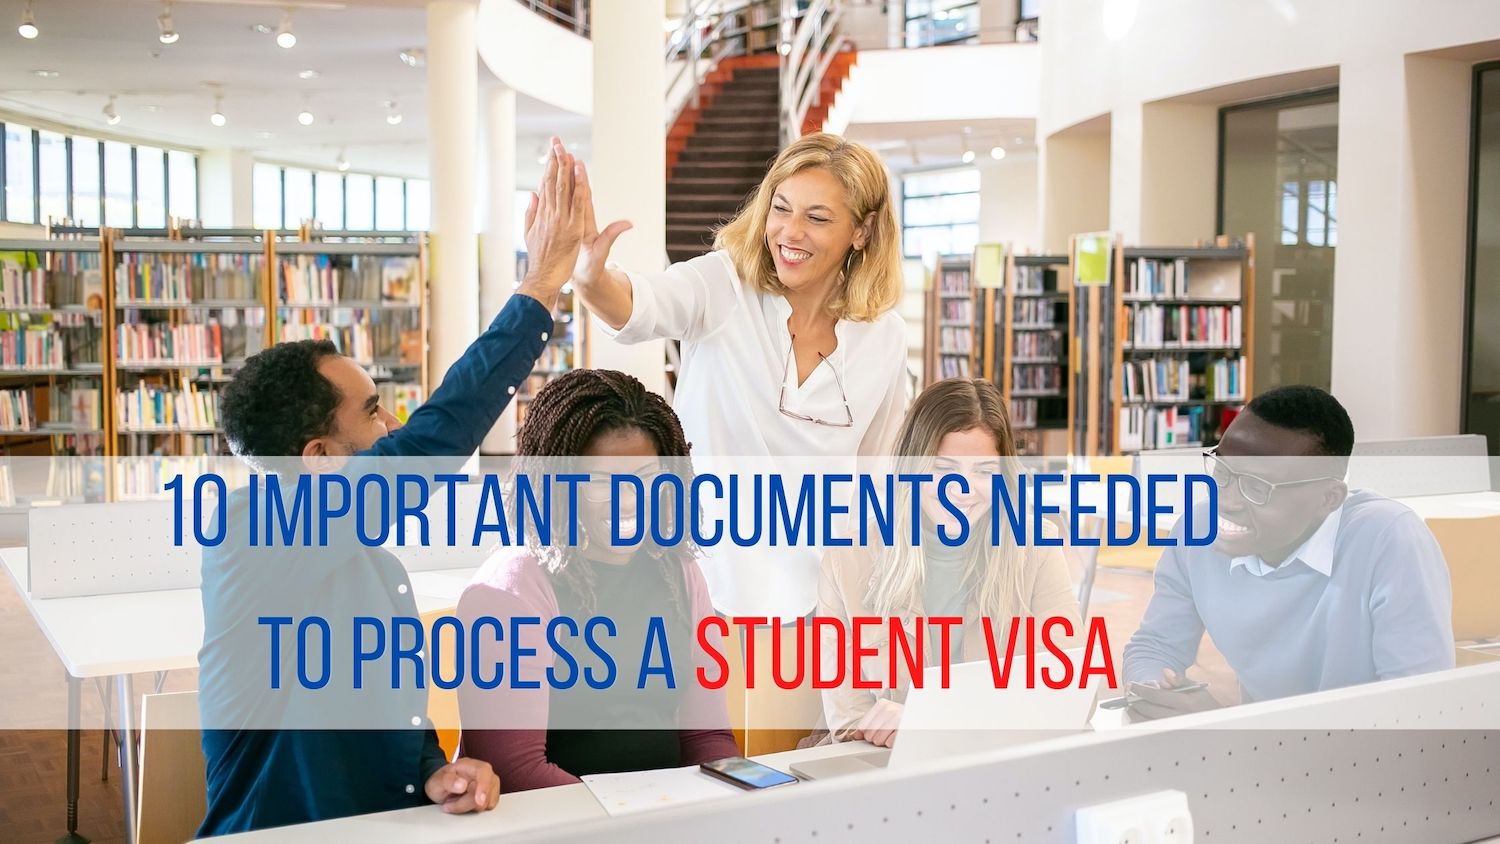 10 Important Documents Needed To Process A Student Visa